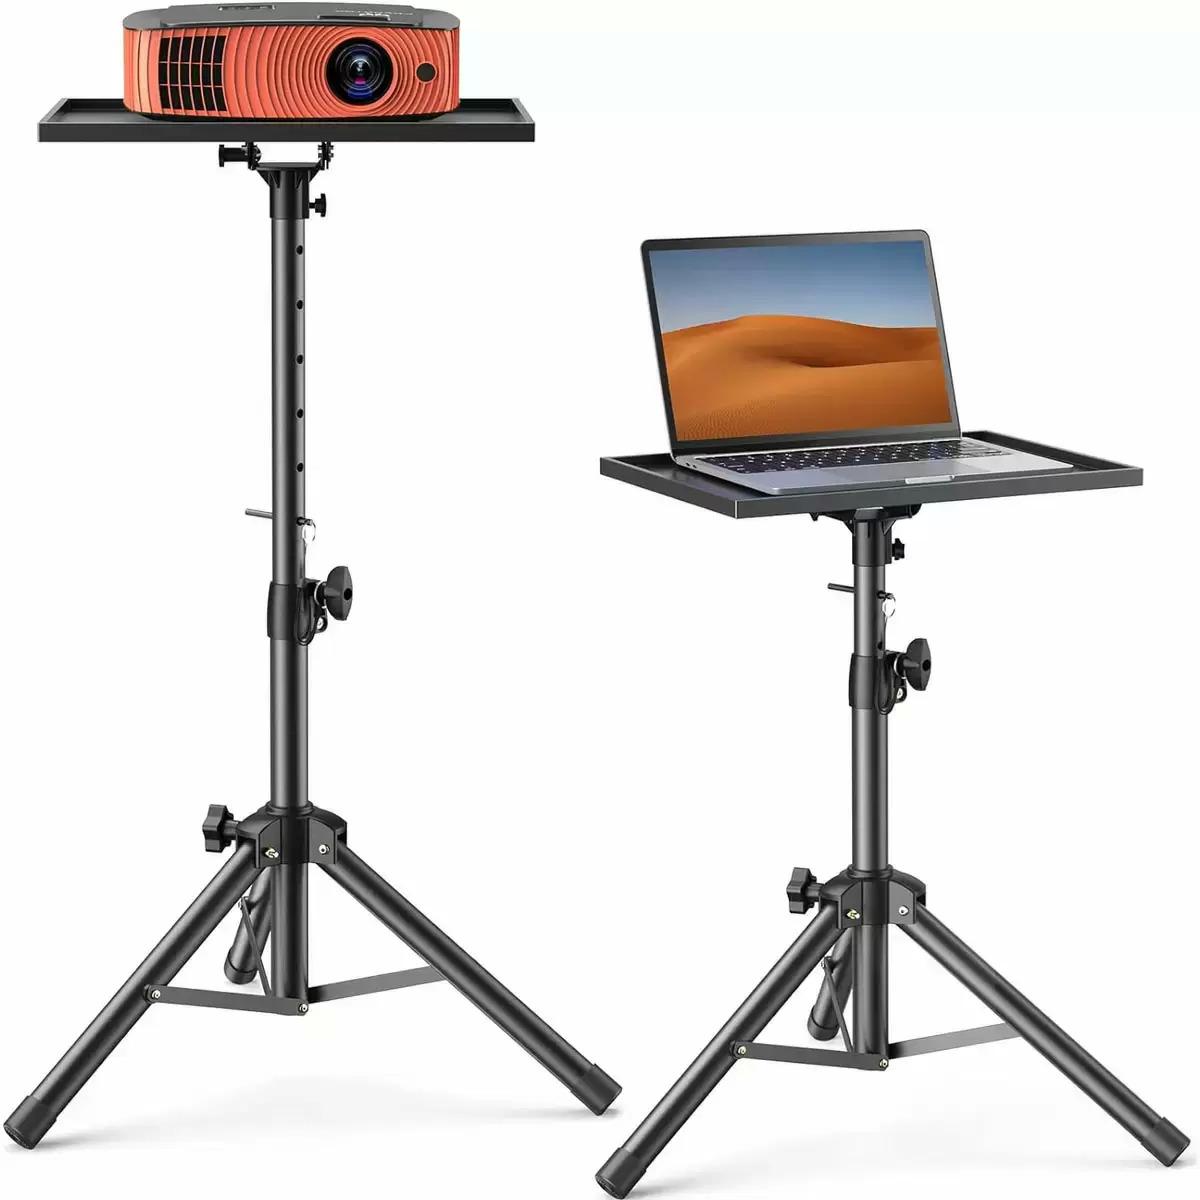 Amada Foldable Adjustable Projector Tripod Stand for $18.08